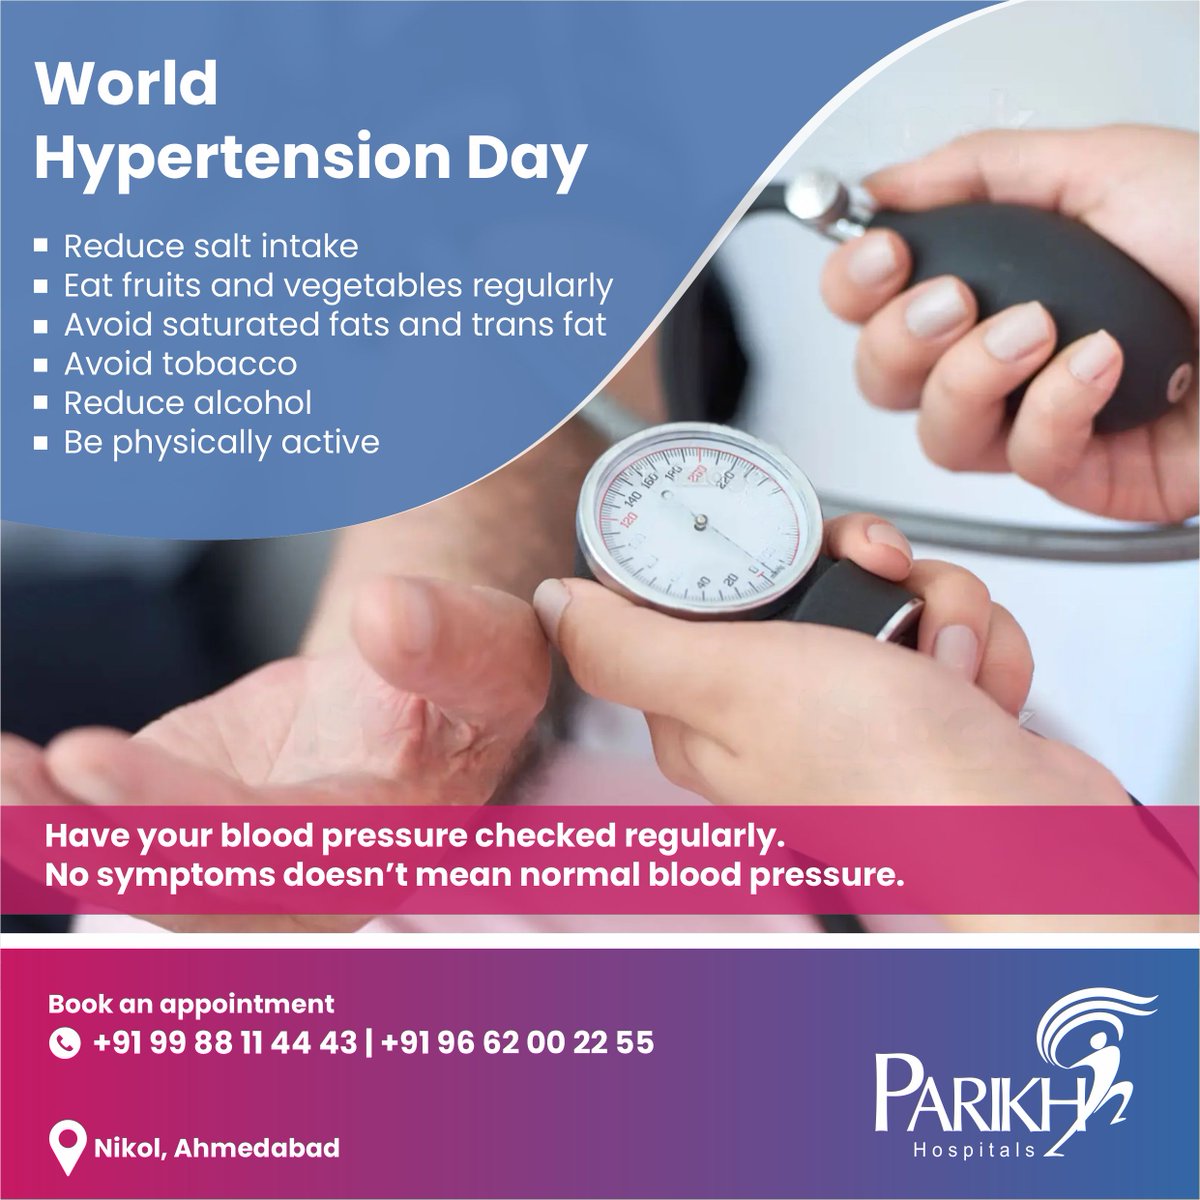 Blood pressure is always written as two numbers. Know your numbers. If your numbers are 140/90. Have a health professional measure your blood pressure regularly. . #ParikhHospitals #nikol #hypertension #hypertensiontips #hypertensionawareness #bloodpressure #WorldHypertensionDay